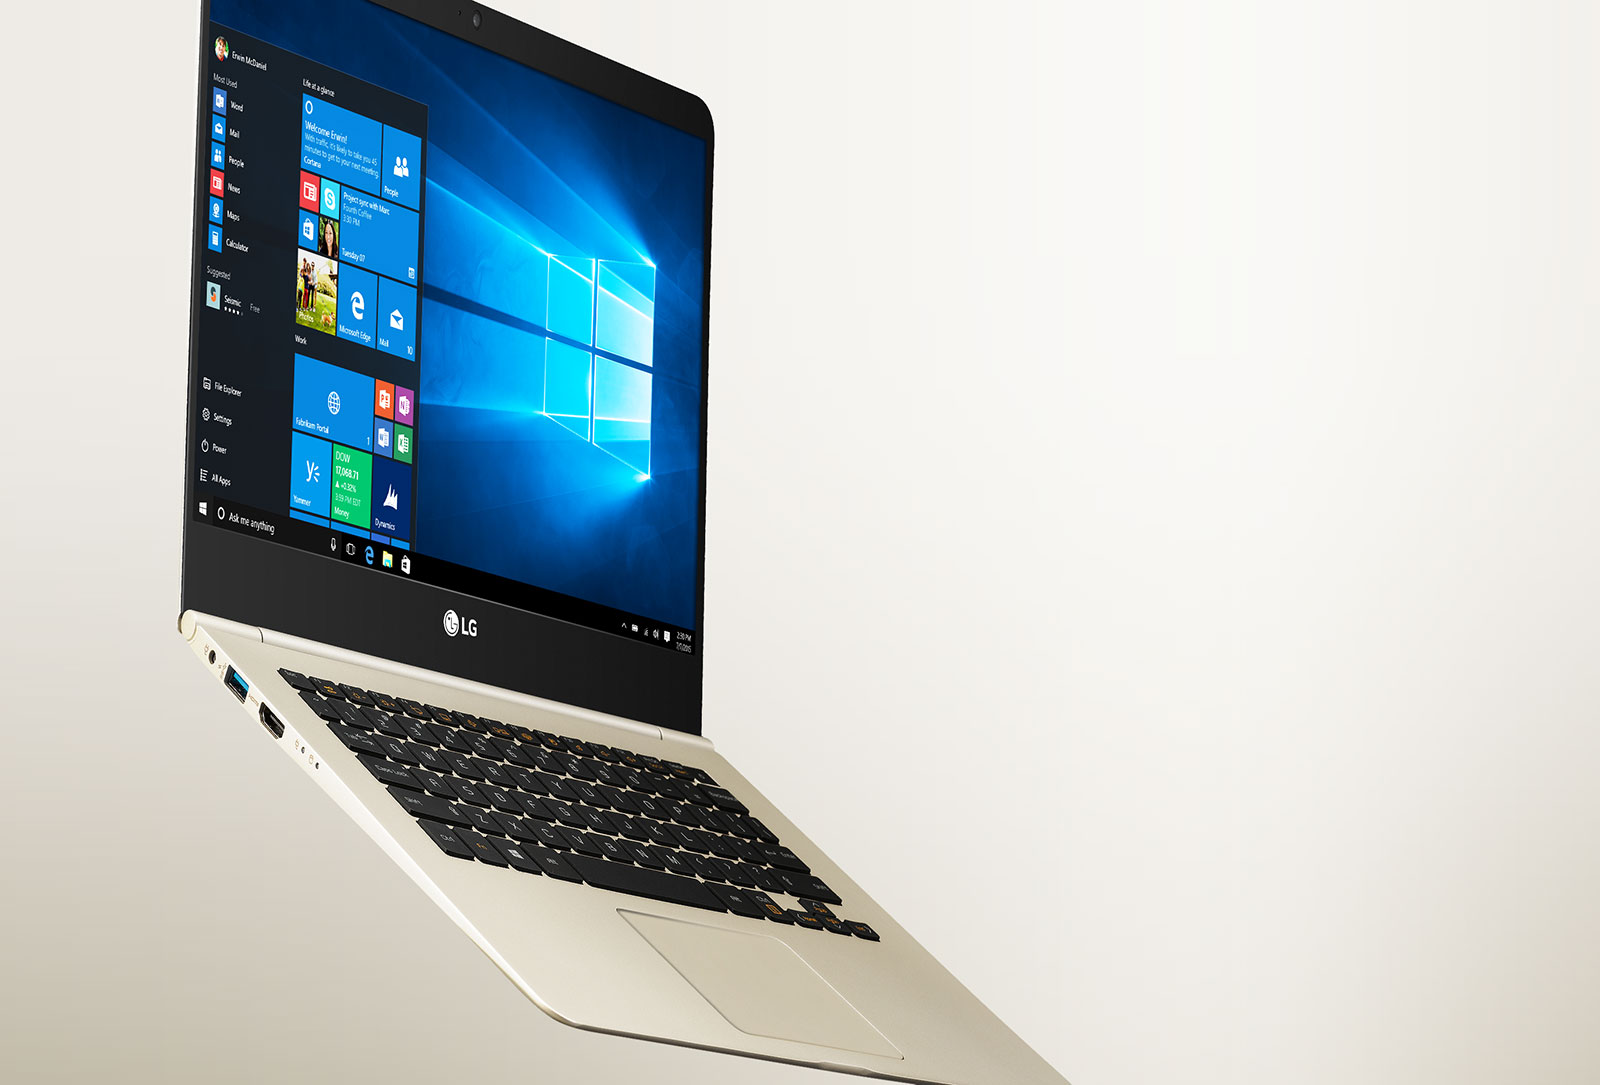 lg gram 1 - LG has an updated Gram laptop lineup that claims battery life up to an unbelievable 24 hours